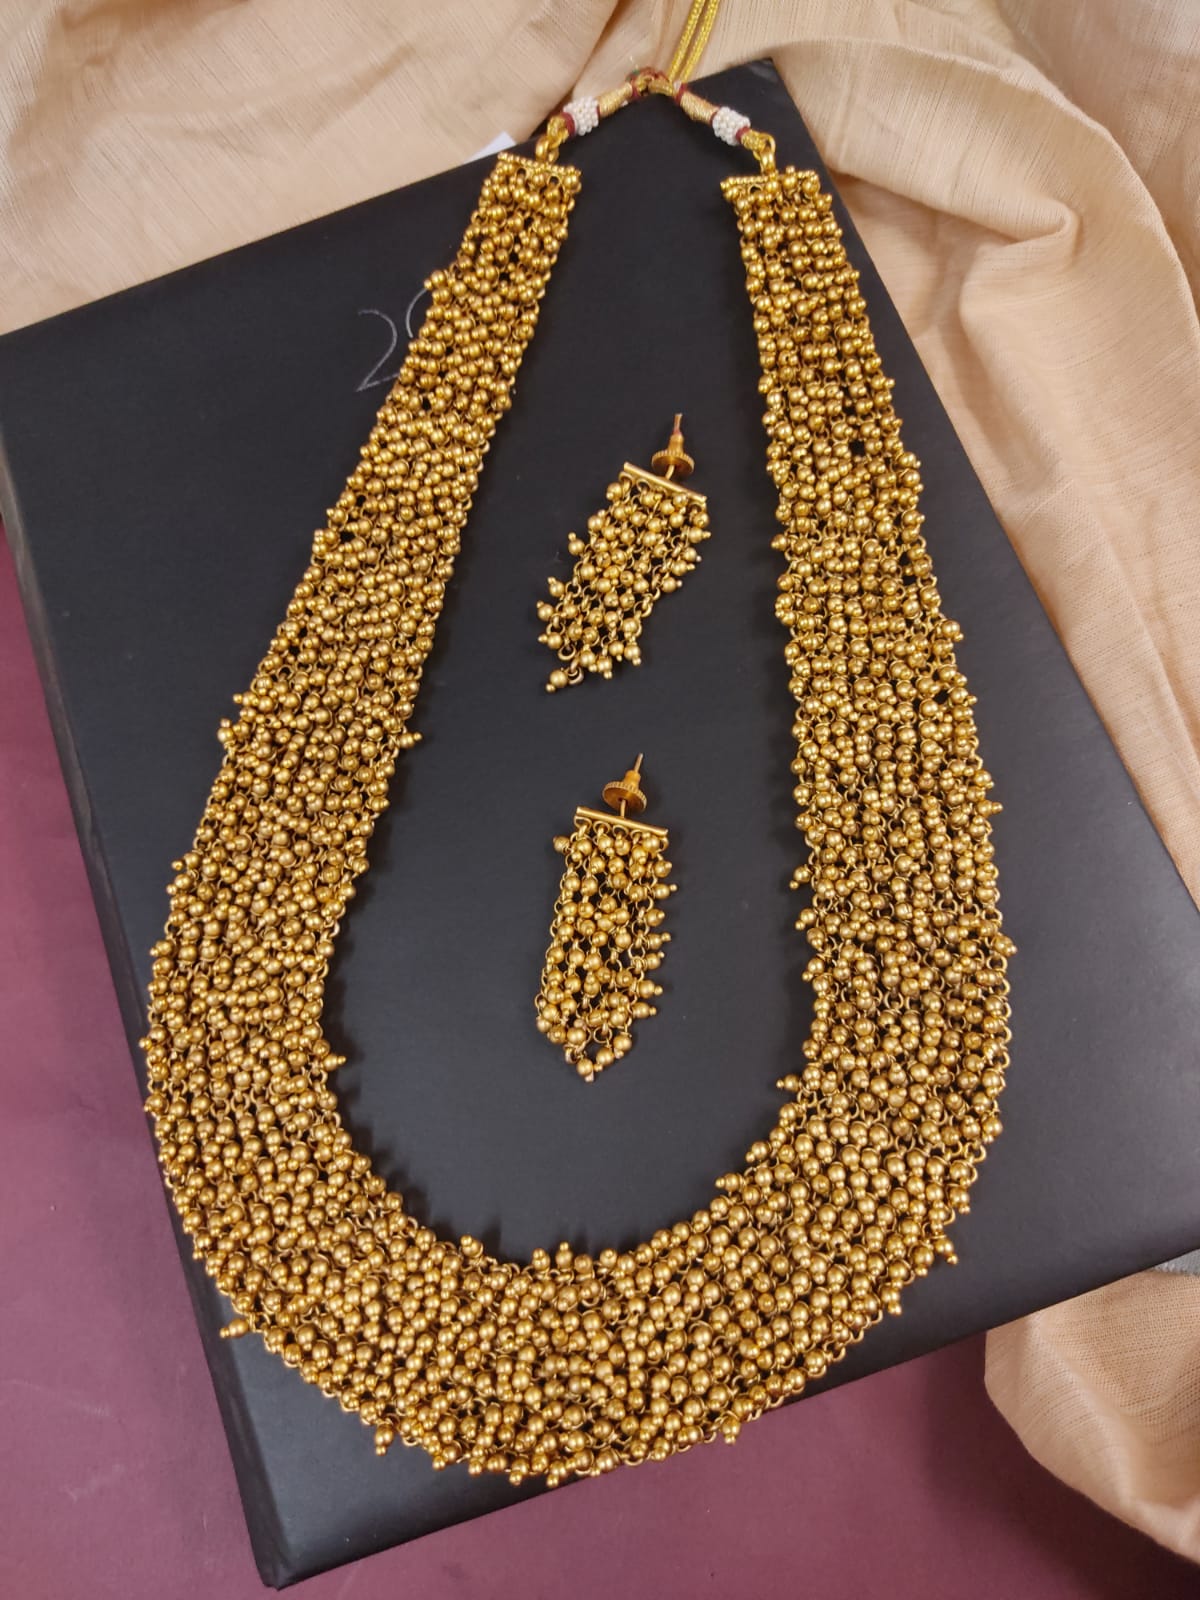 Gold Coral Necklace Design - South India Jewels | Fashion jewelry earrings, Jewelry  patterns, Gold necklace designs